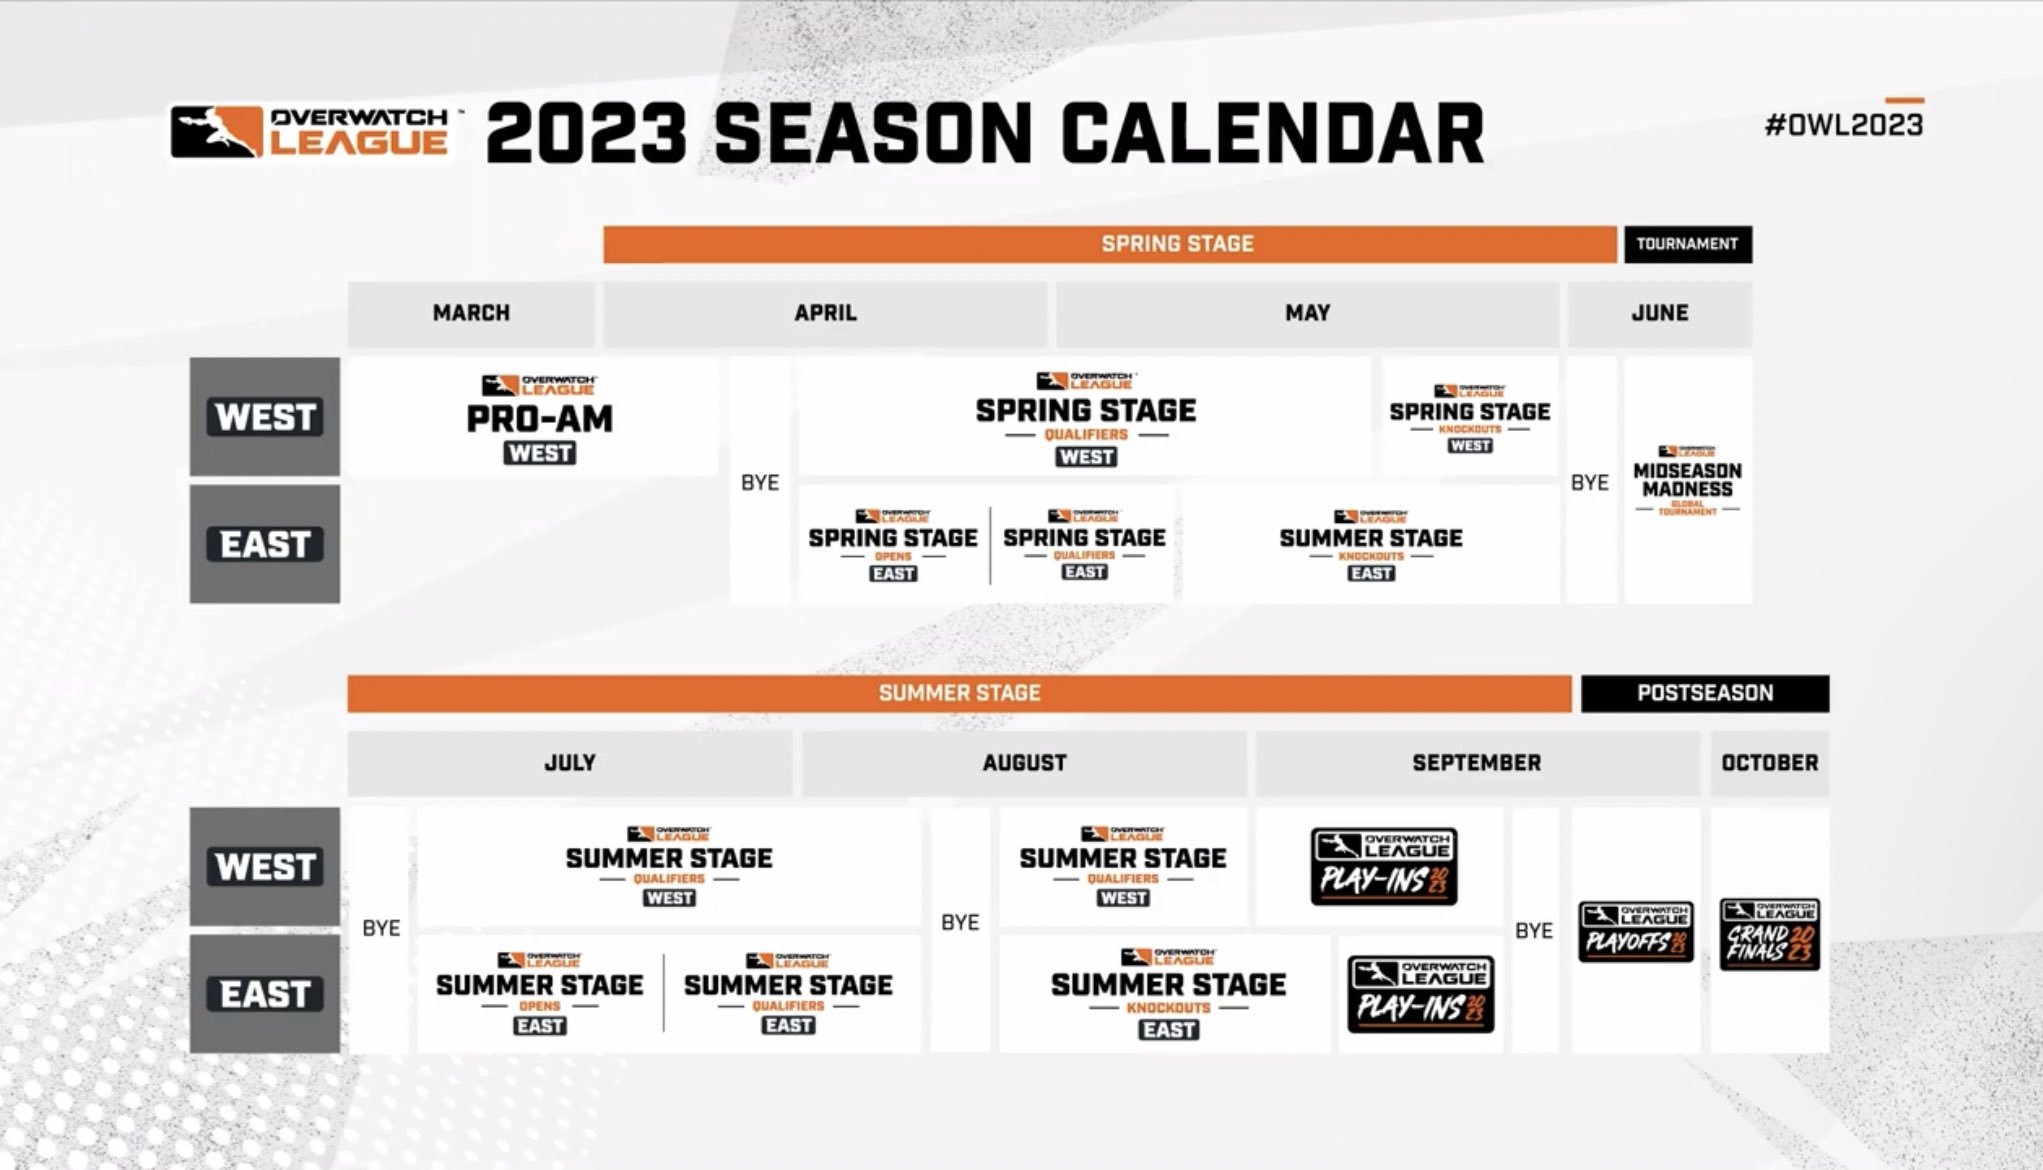 The Overwatch League 2023 starts in March